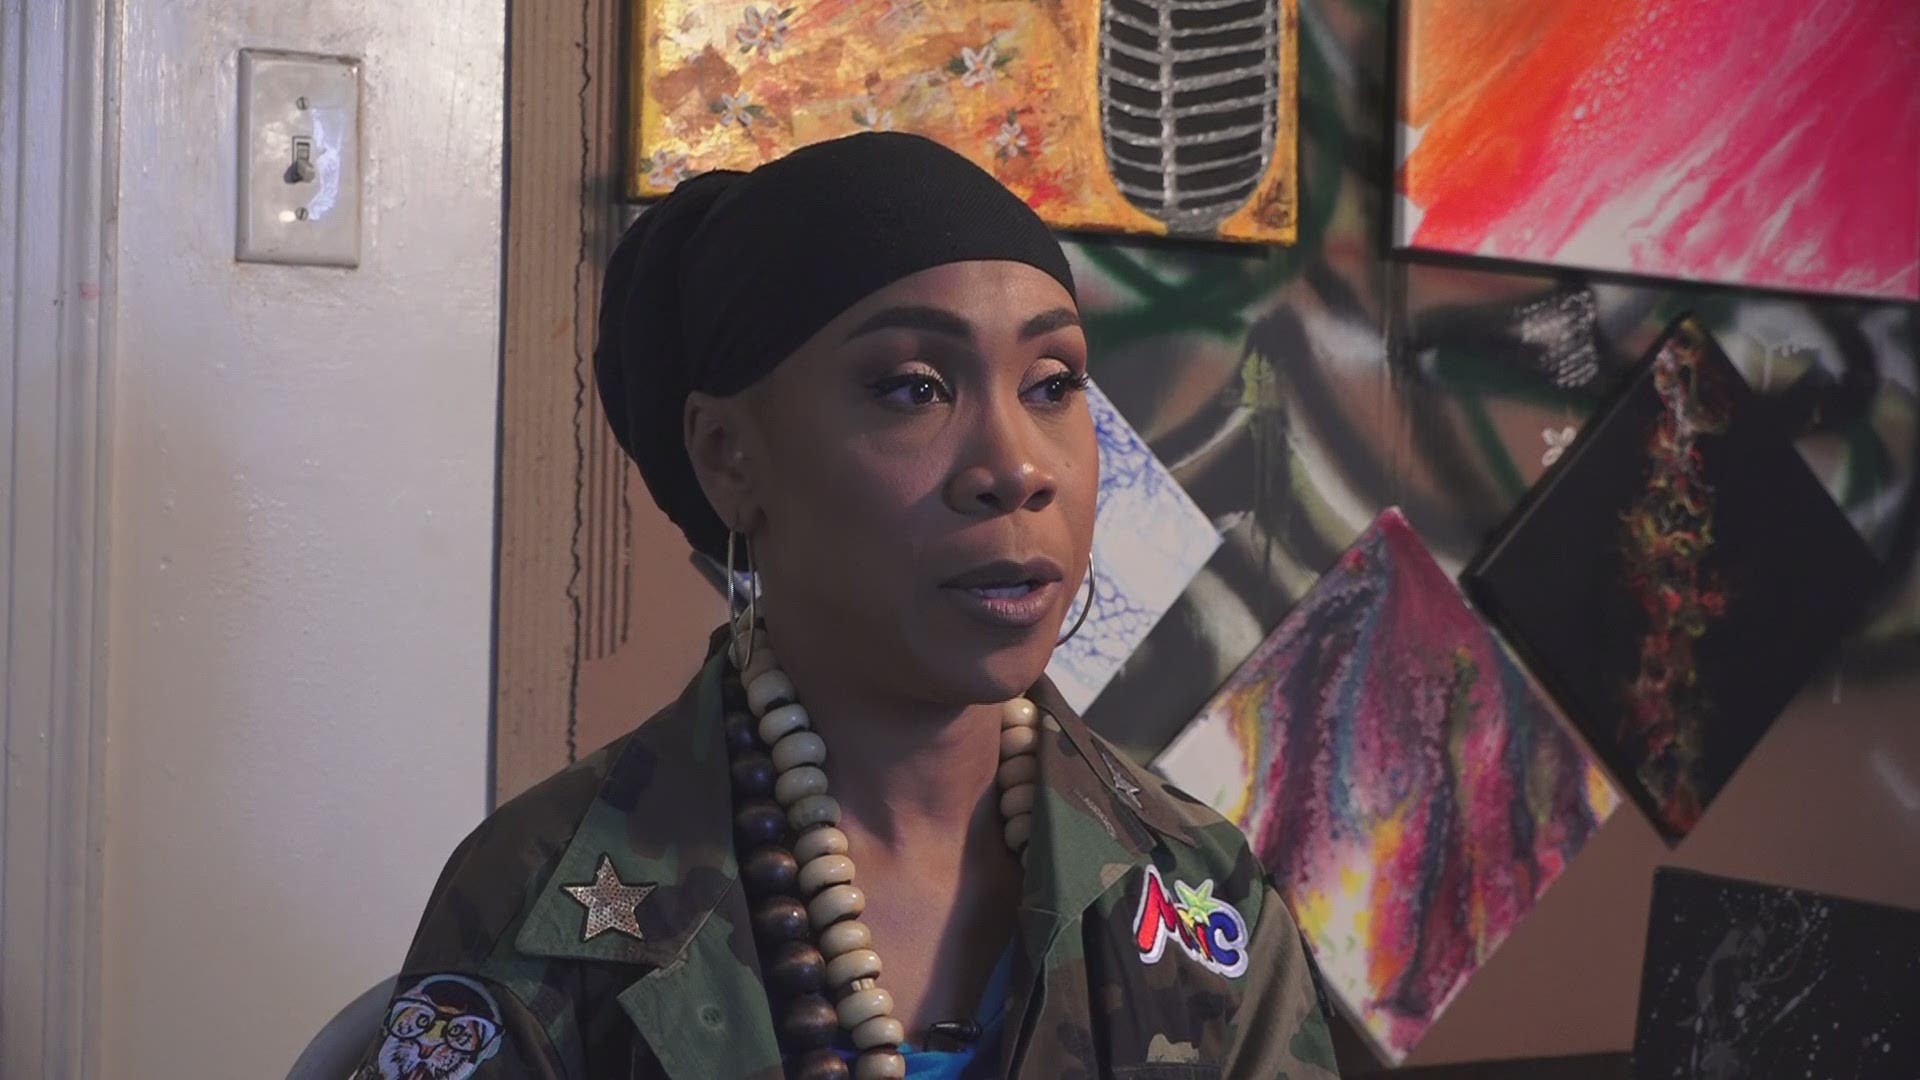 This woman lost her job. So, she turned her apartment into an art studio. #ForTheCulture